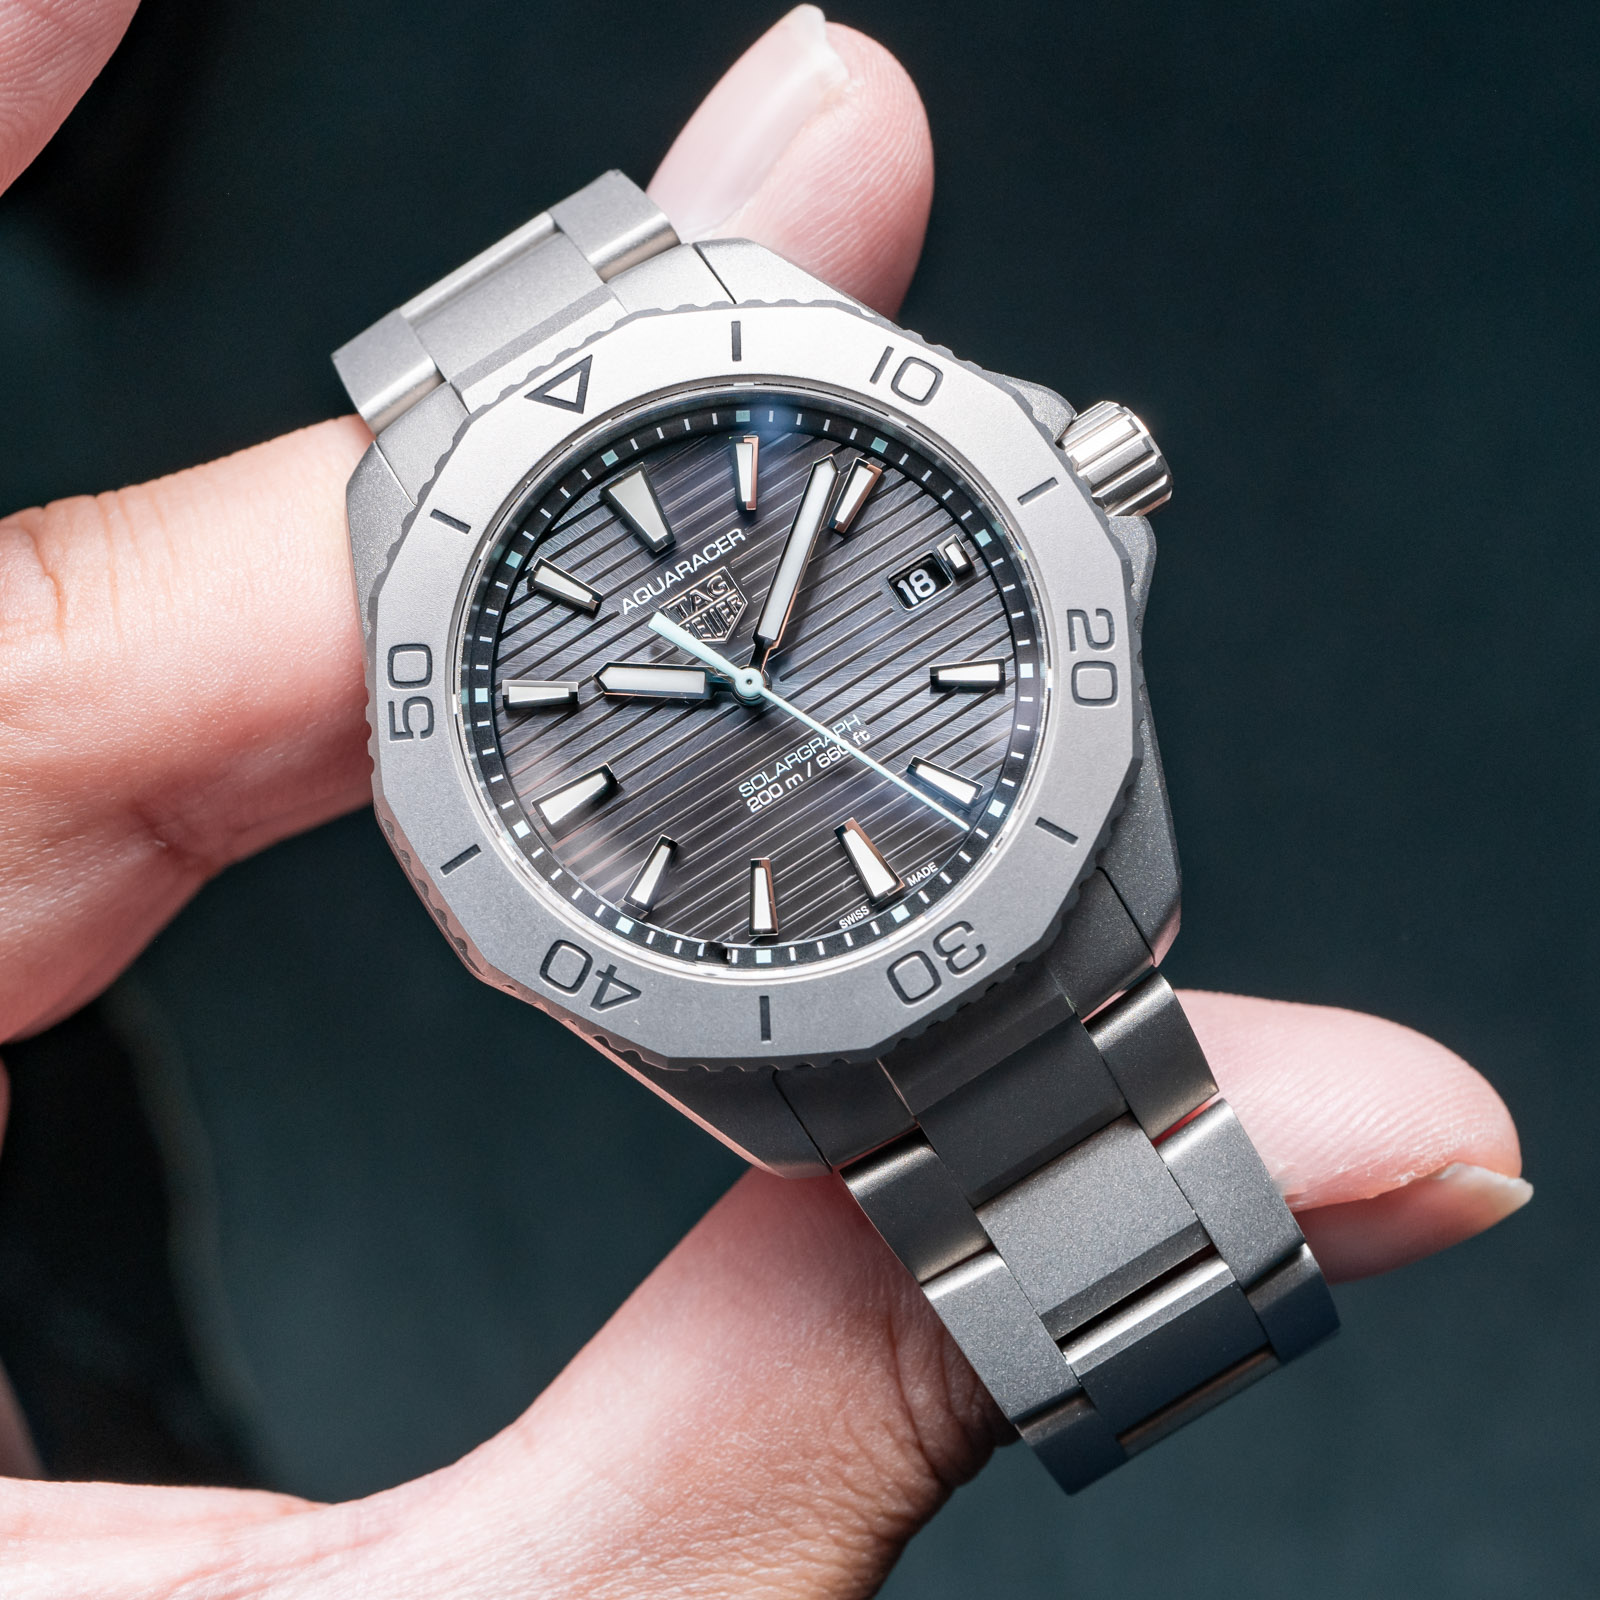 Running on Sun: A Second Look at the TAG Heuer Aquaracer Professional 200 Solargraph